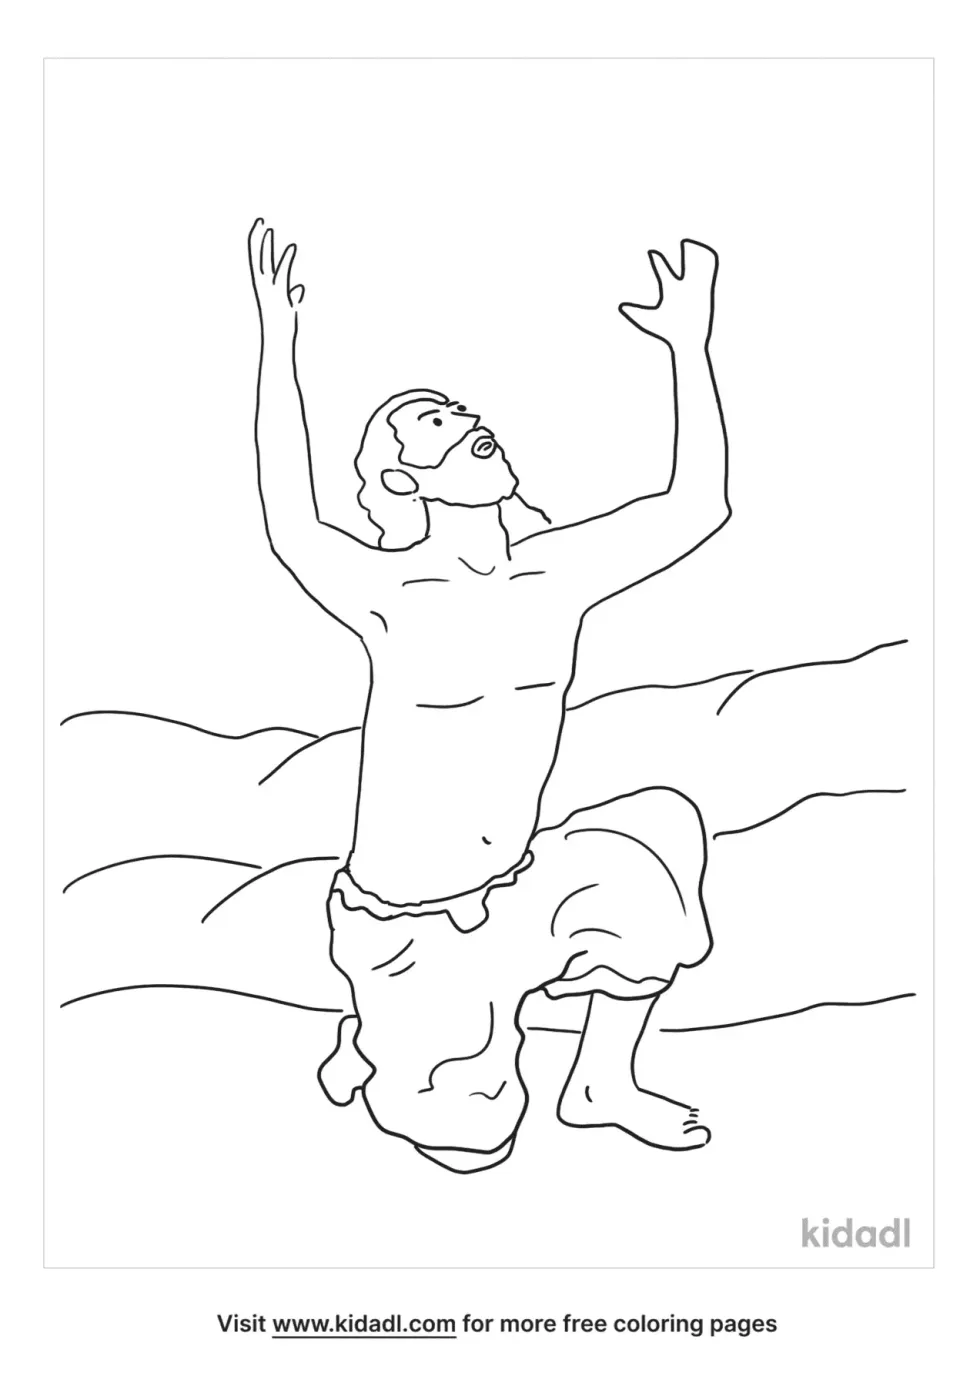 God In The Still Small Voice Coloring Page